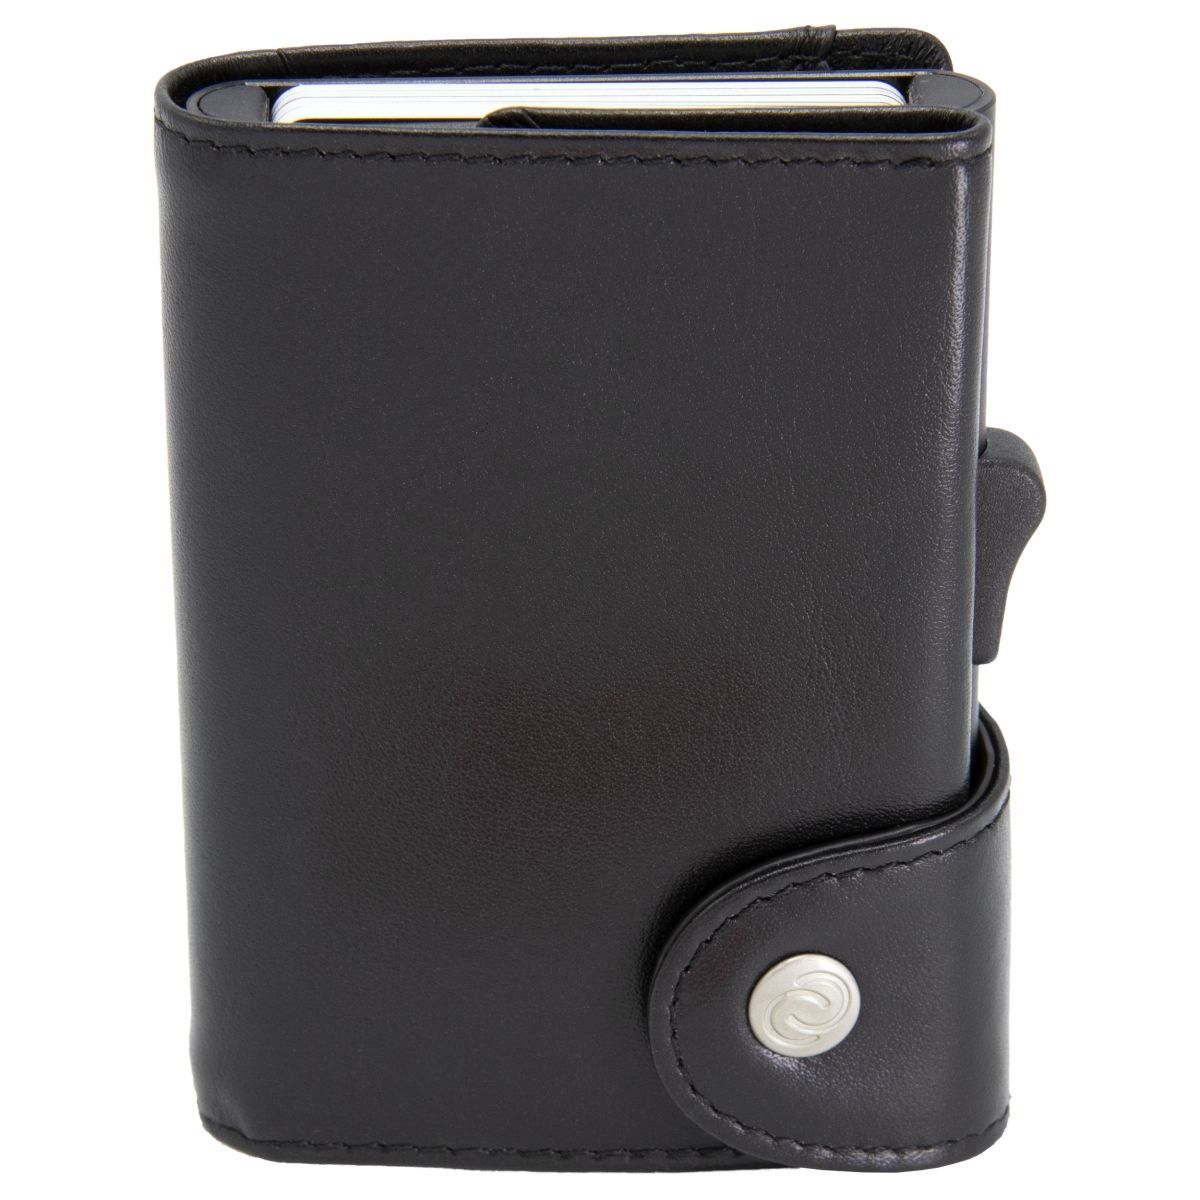 C-Secure XL Aluminum Wallet with Genuine Leather and Coins Pocket - Black